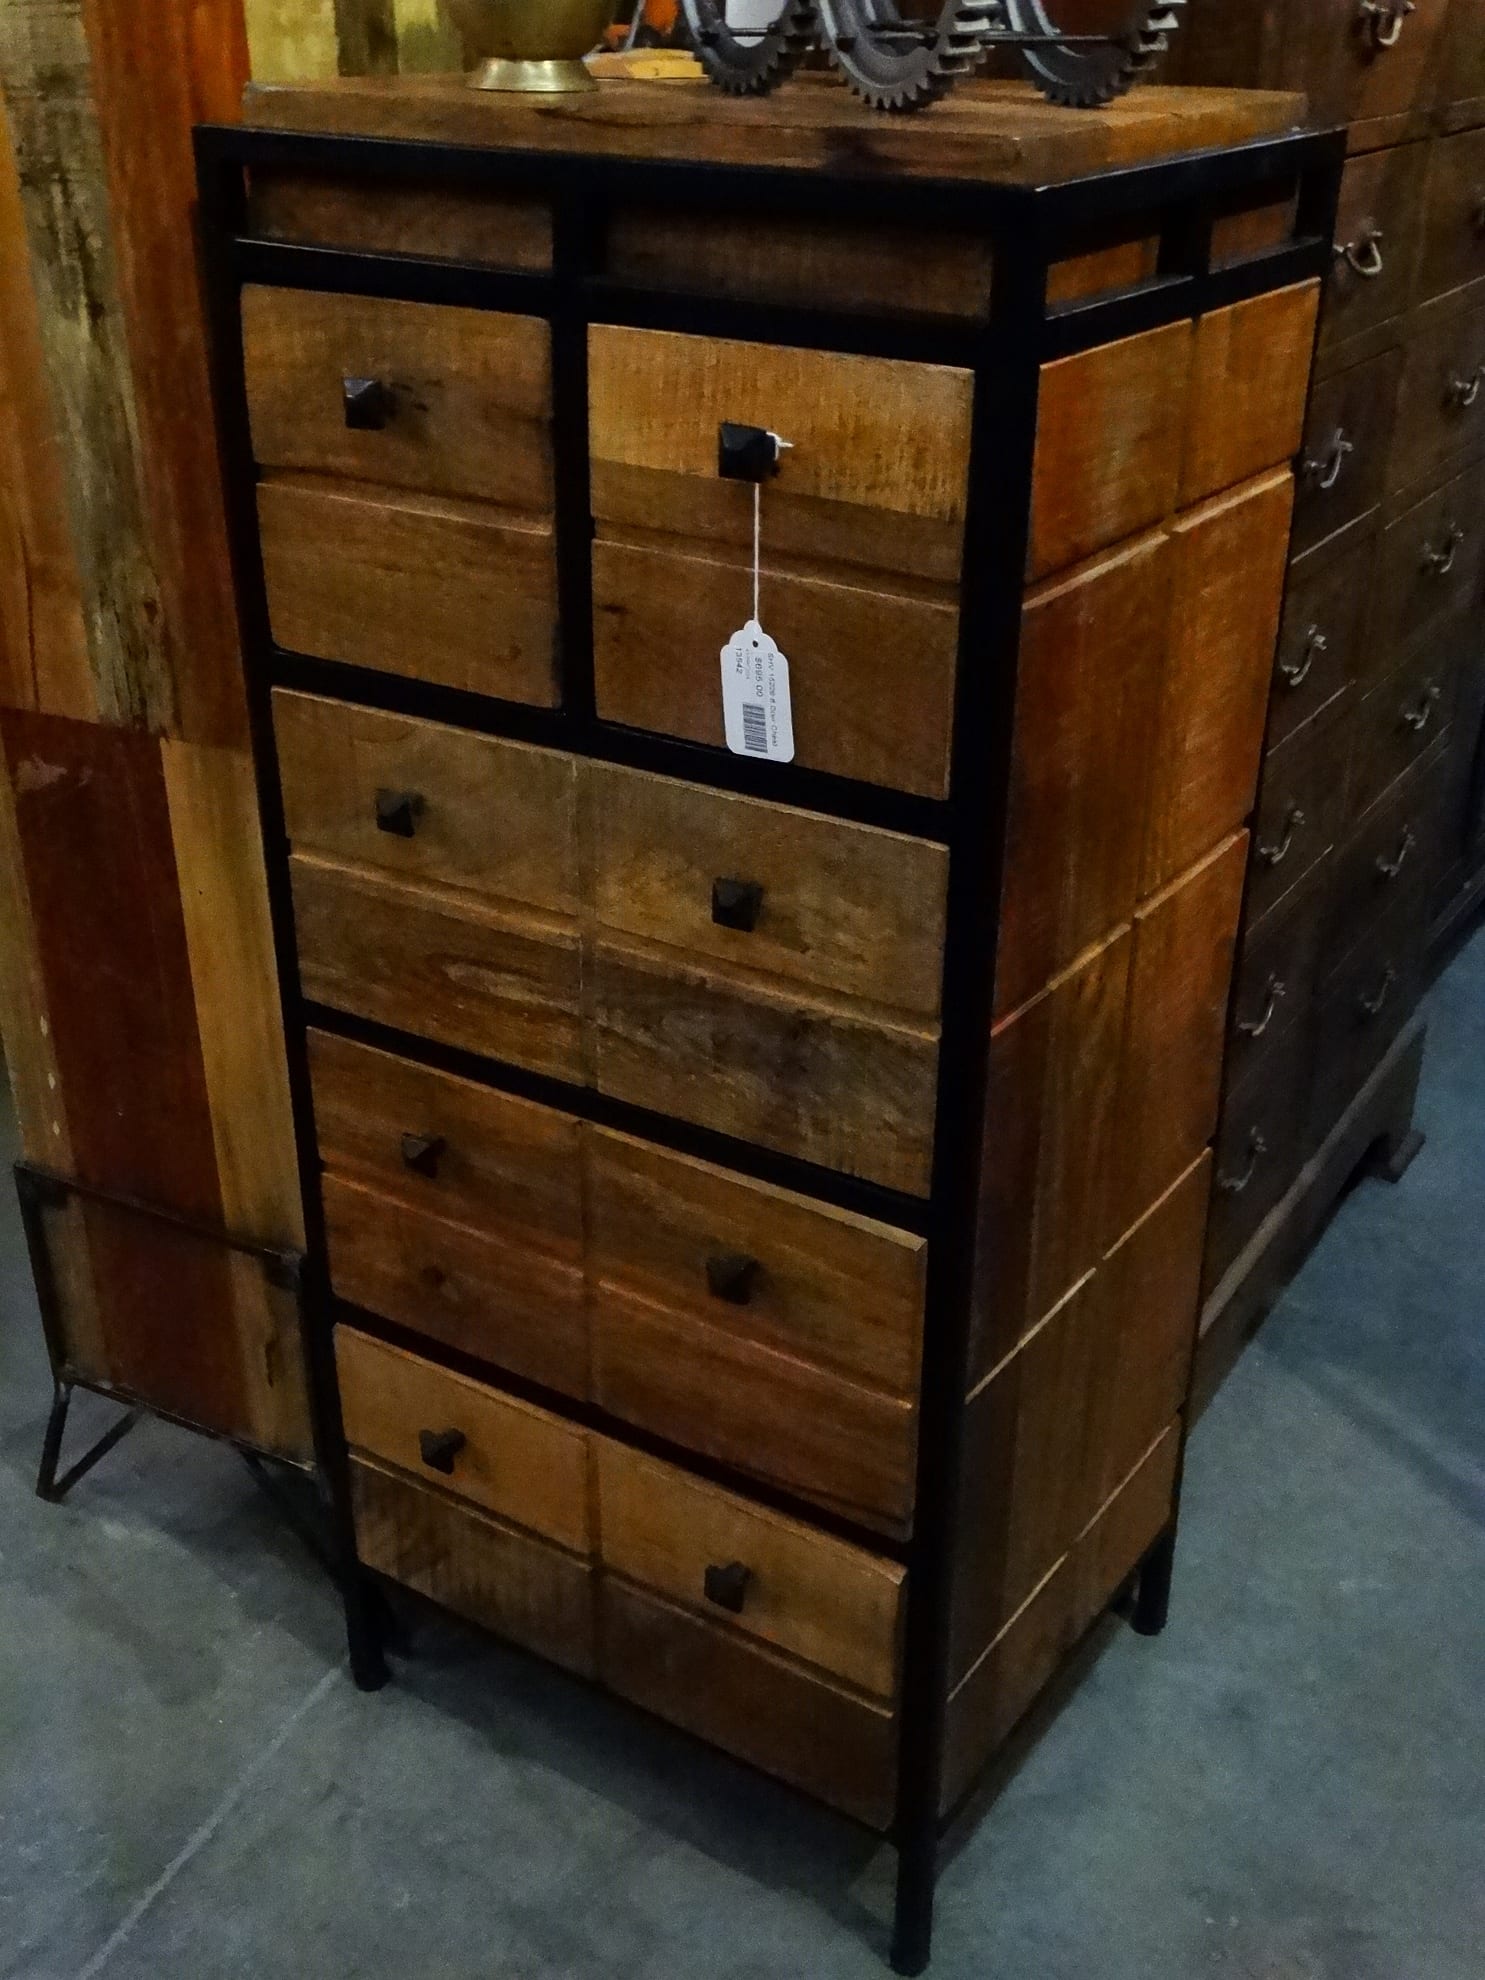 Metal Chest Of Drawers Dresser Features 8 Drawers Perfect In Any